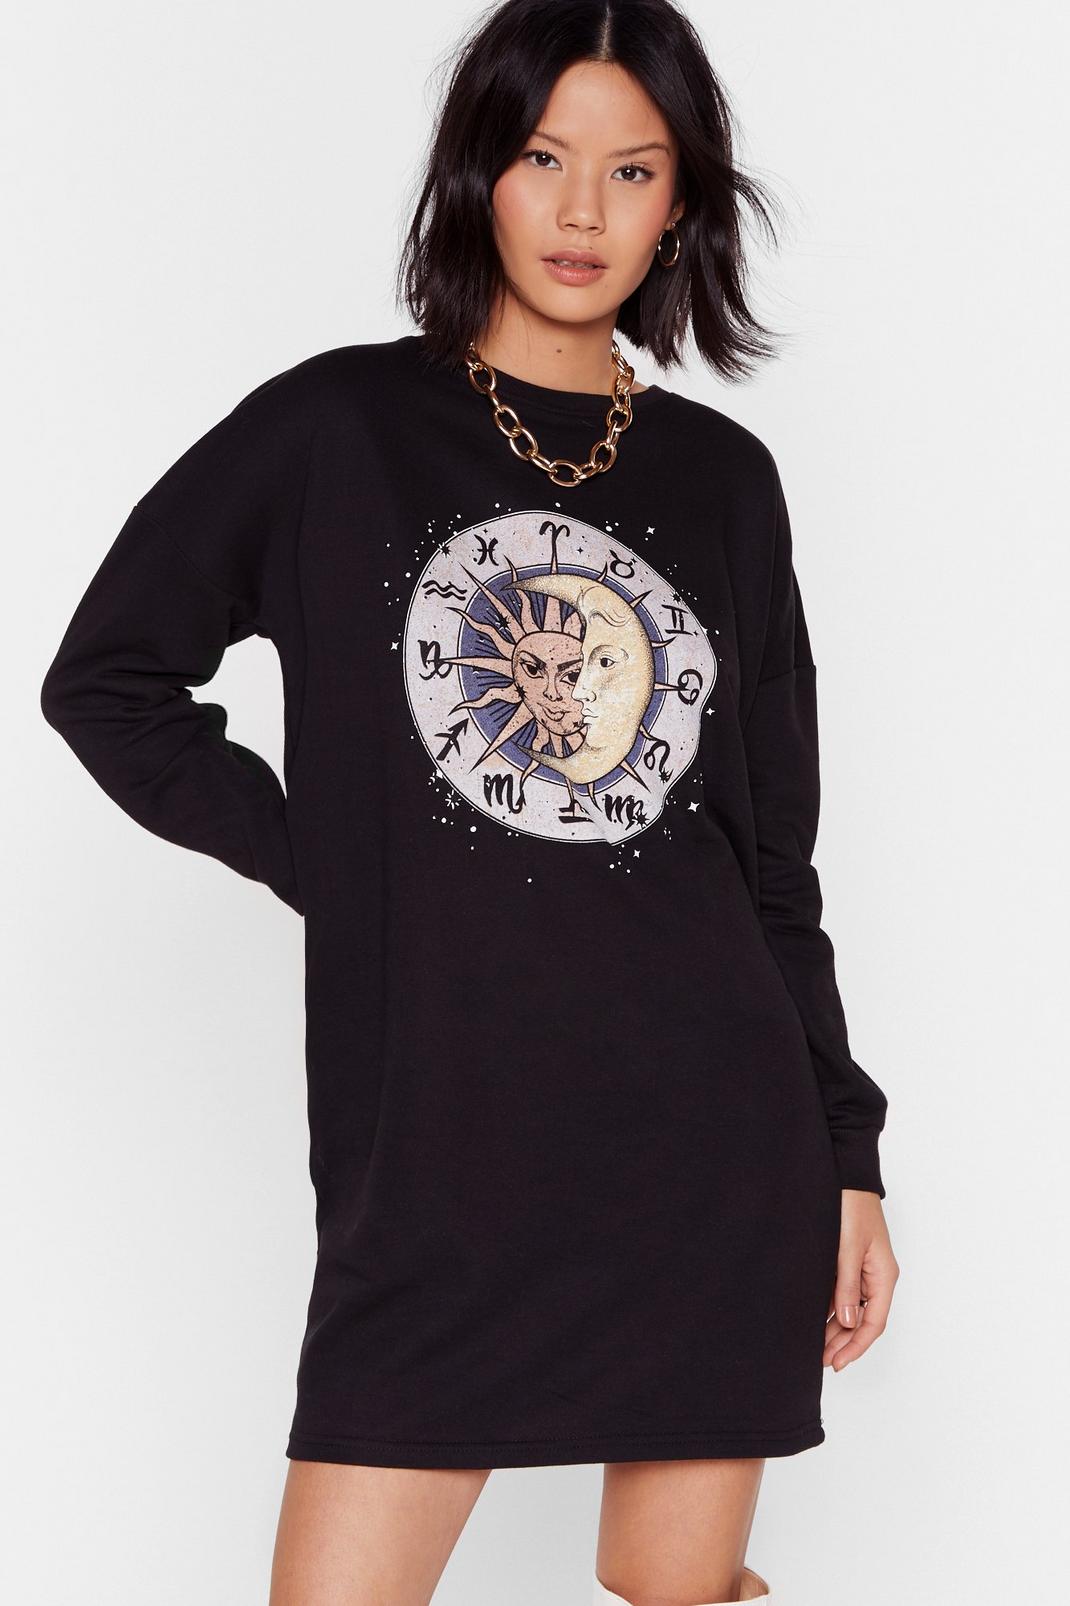 Horoscope Out the Situation Graphic Sweatshirt Dress | Nasty Gal